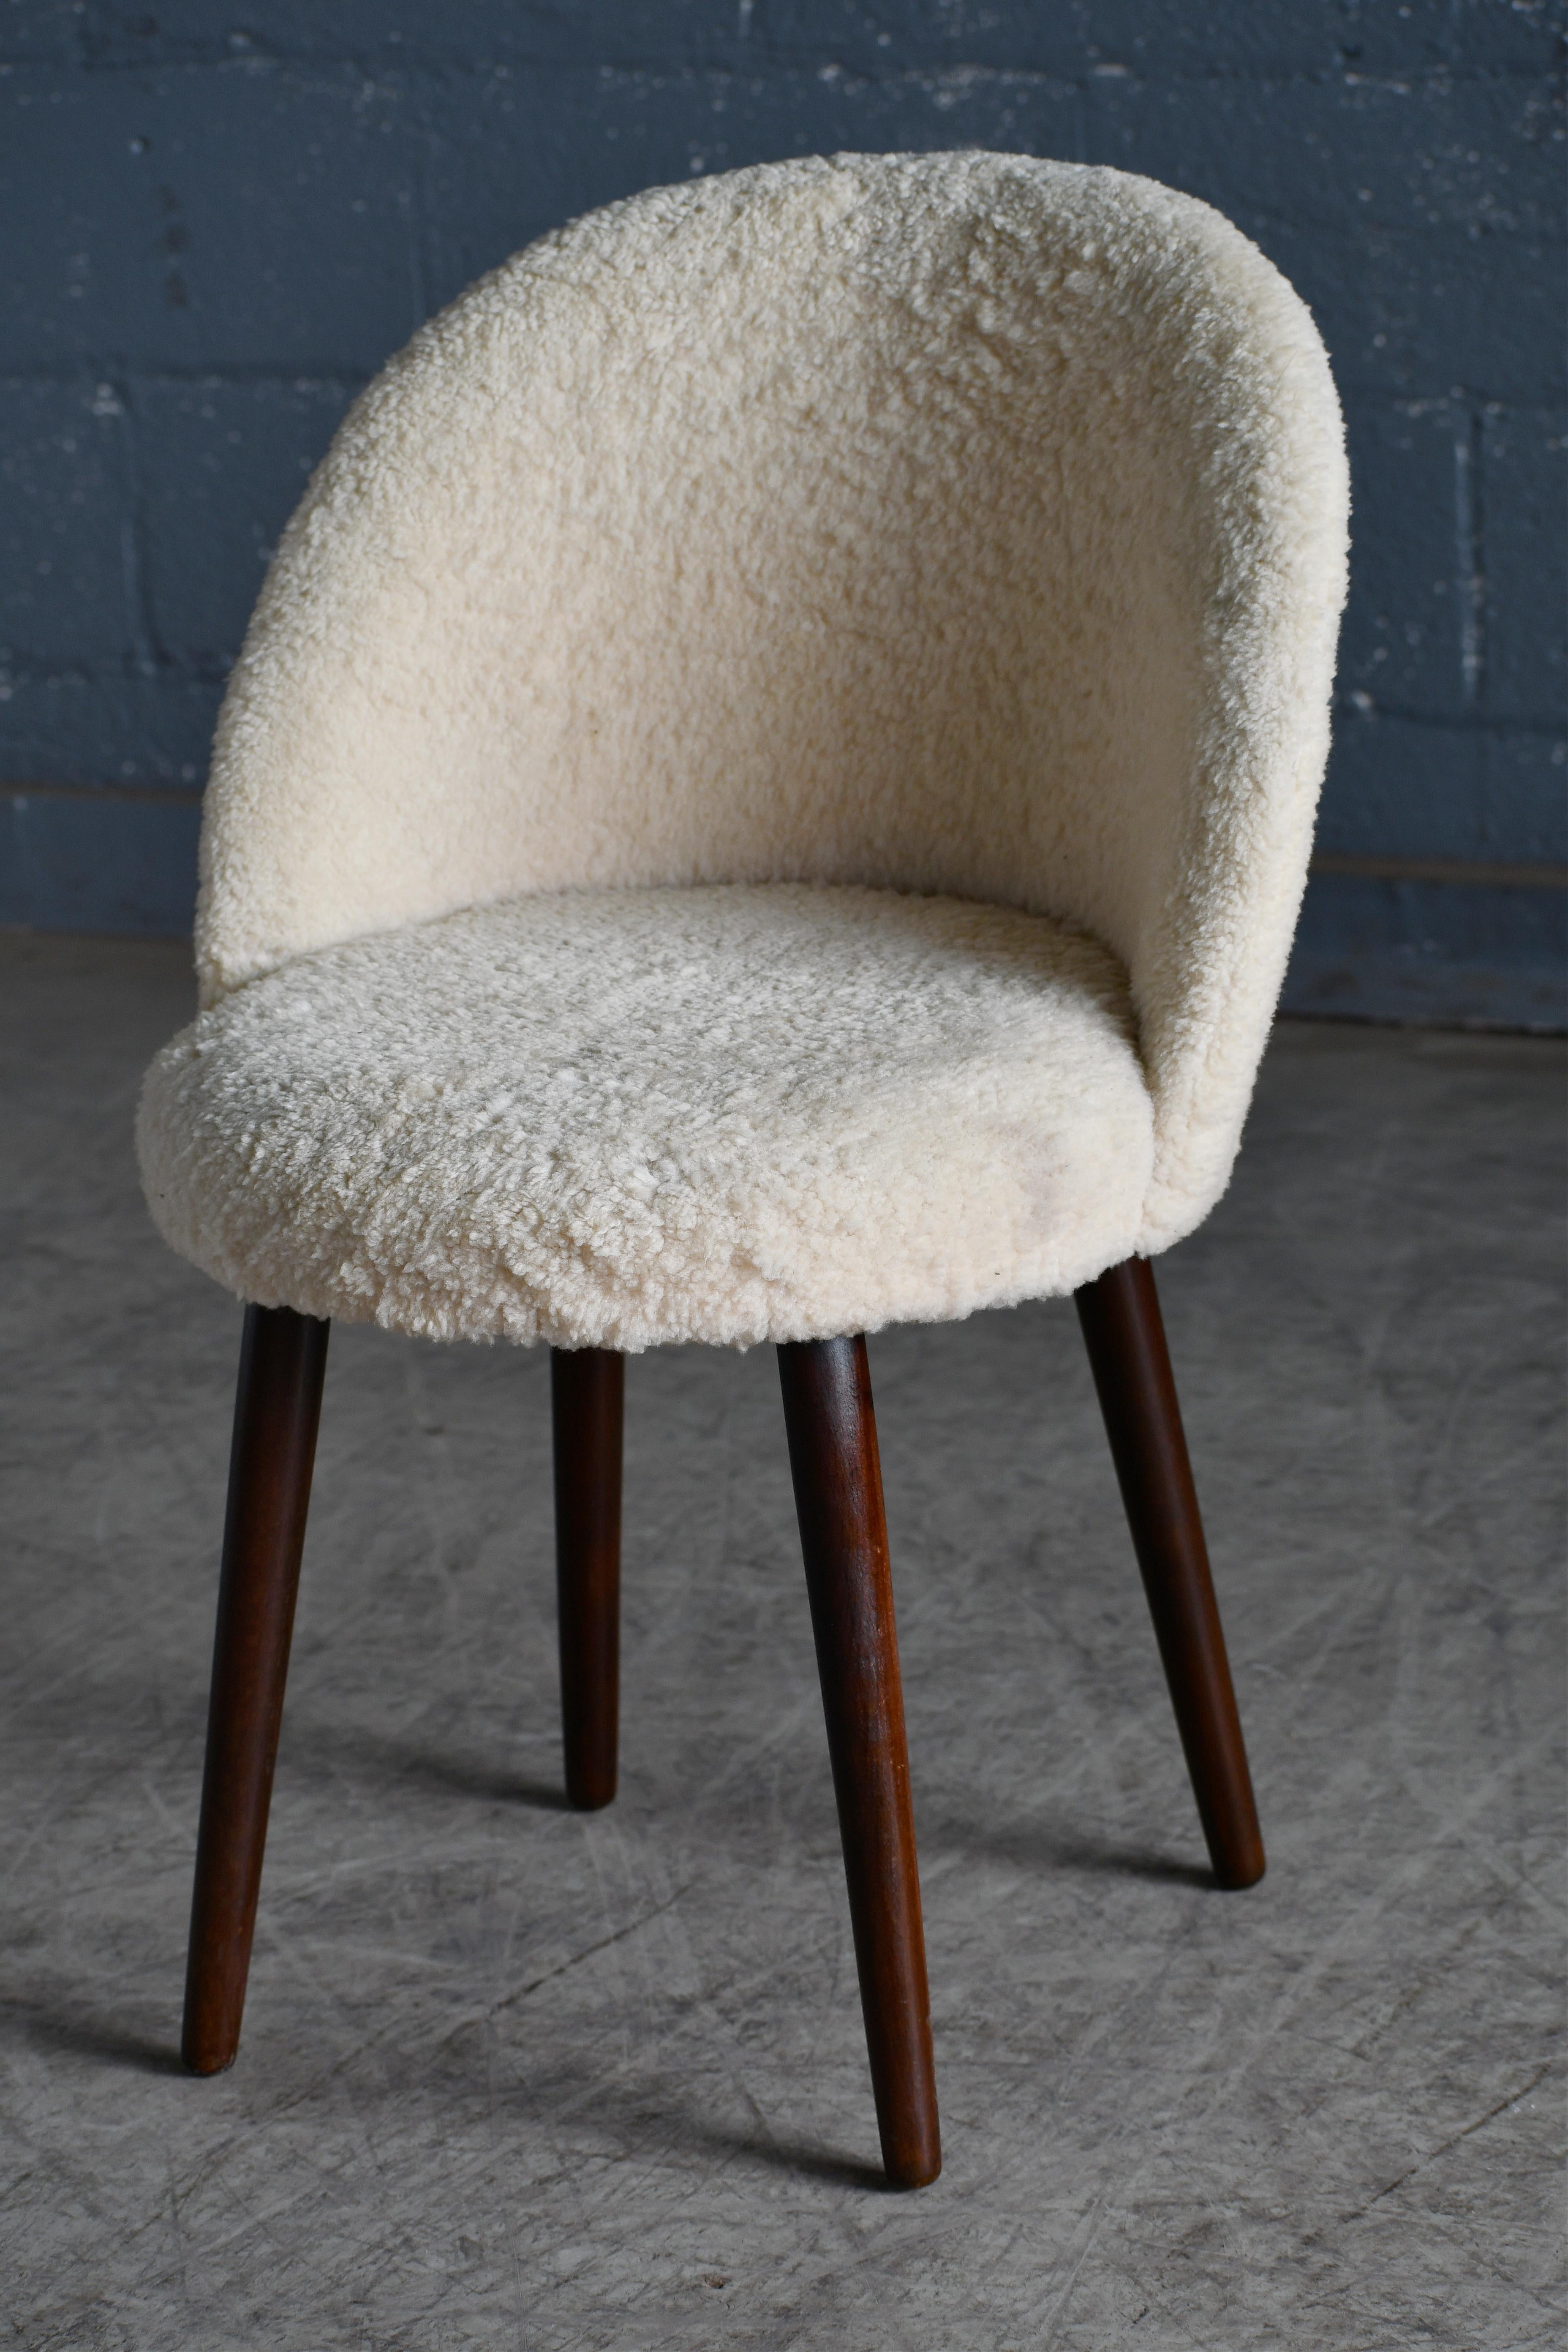 This is a great small vanity chair in the style of Frode Holm covered in plush lambskin. For the person that already has everything, this may be the one thing to get. The chair is comfortable and supportive with a curved backrest. Light but sturdy.